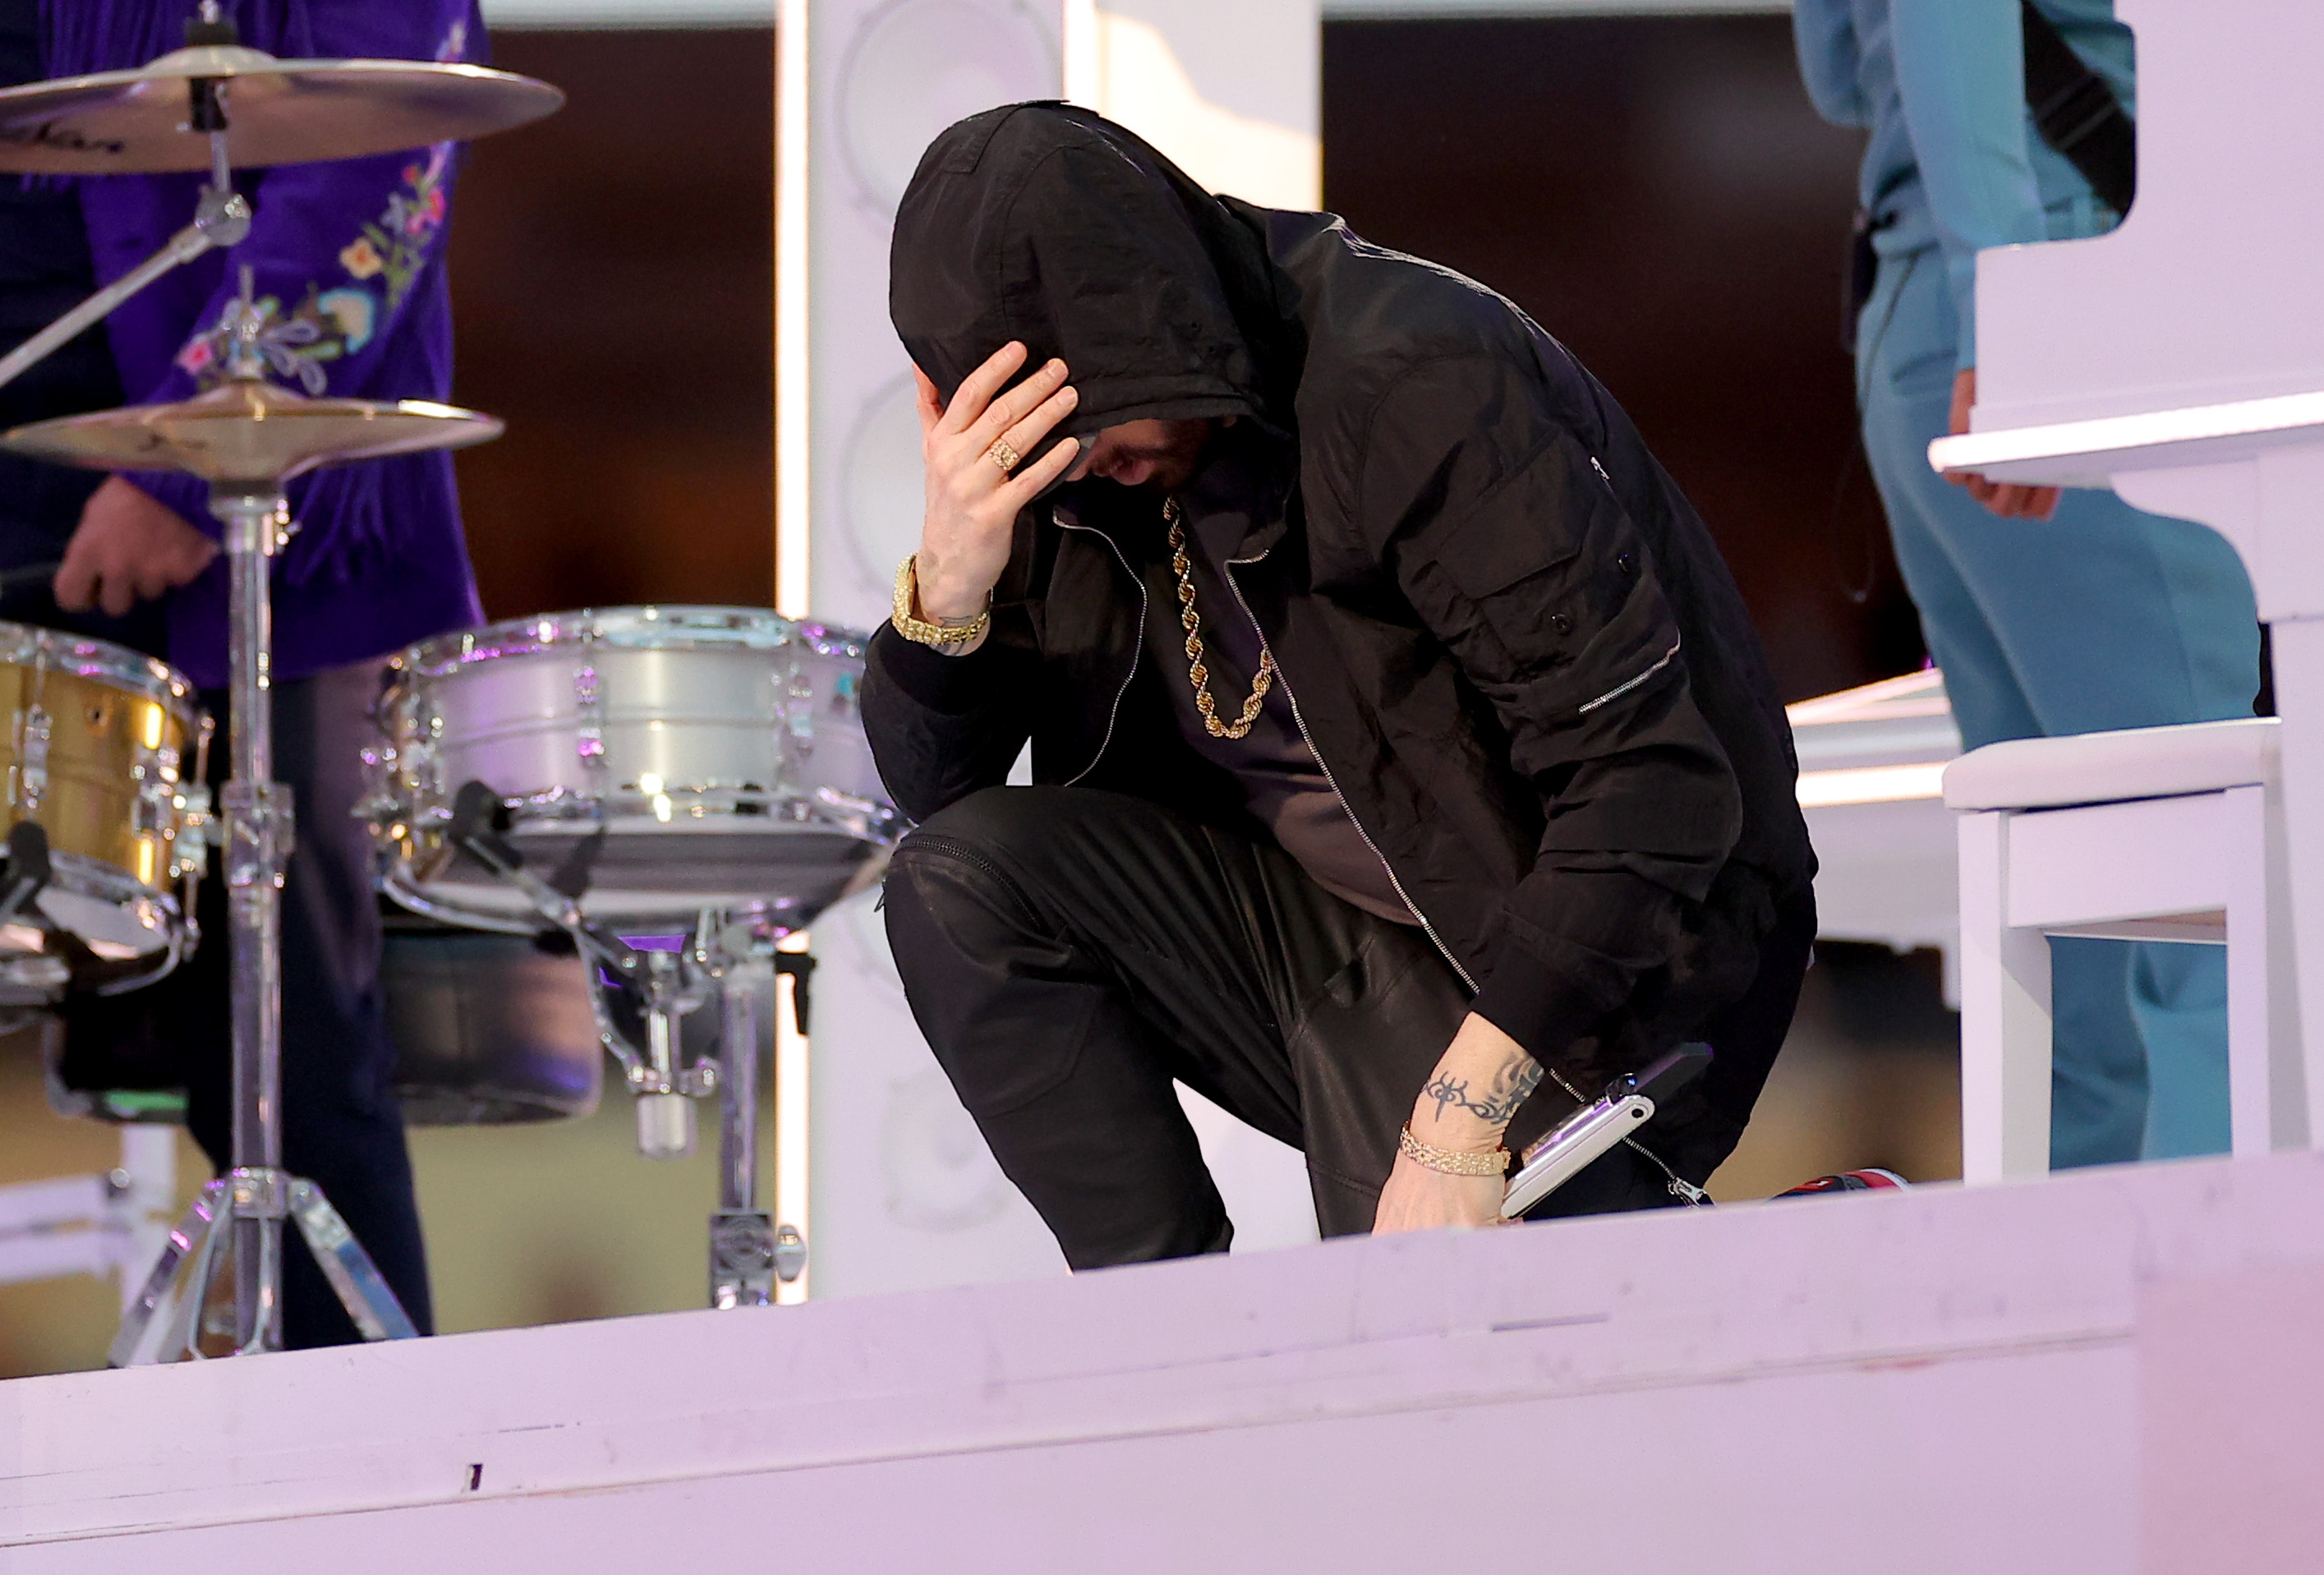 Video of Eminem Taking the Knee During Super Bowl Halftime Show Viewed